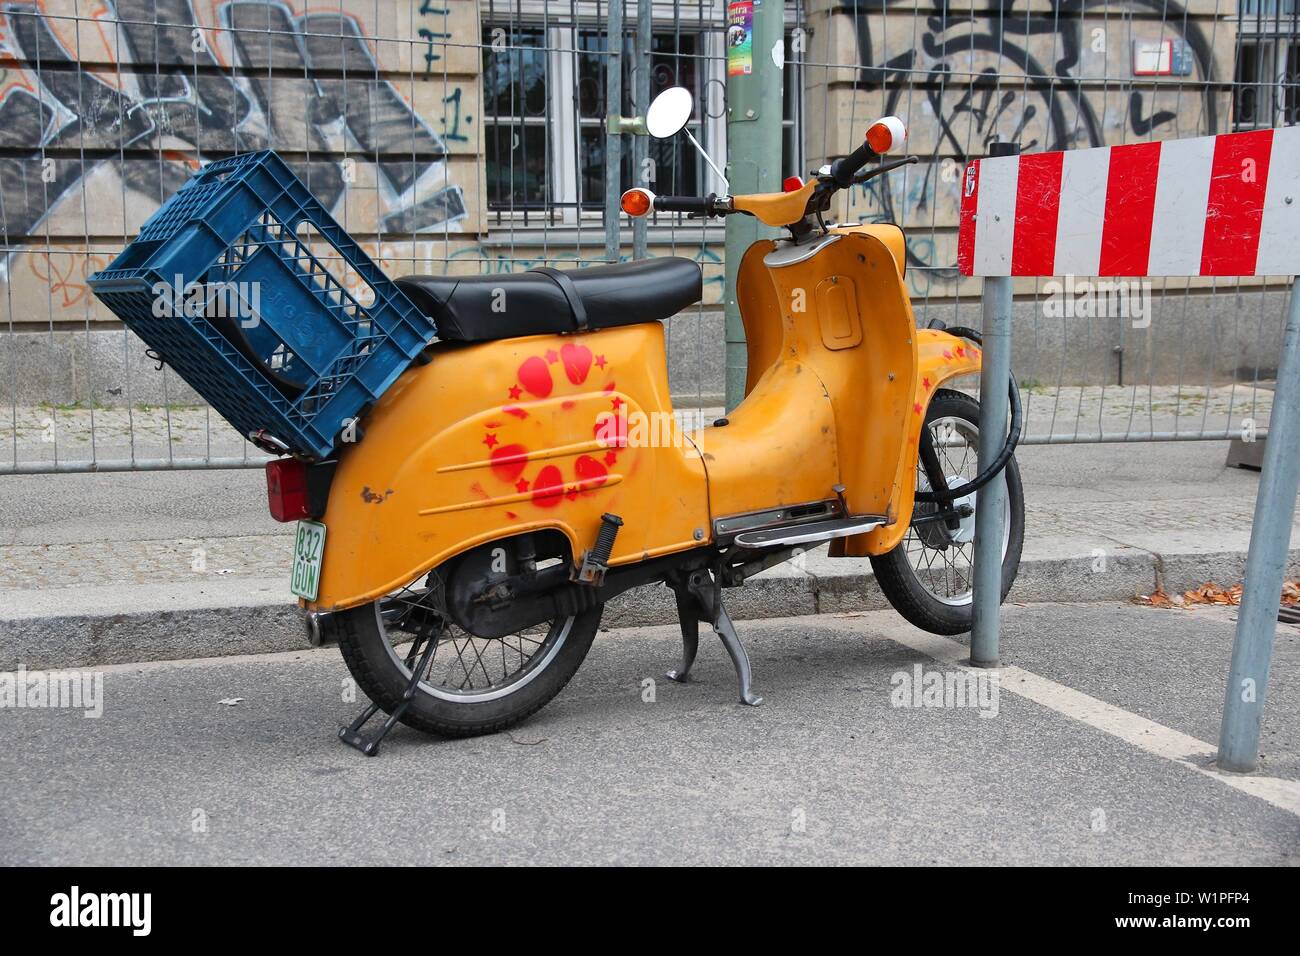 BERLIN, GERMANY - AUGUST 25, 2014: Simson Schwalbe oldtimer scooter parked  in Berlin. More than 900 thousand were produced in 1959-1986 Stock Photo -  Alamy